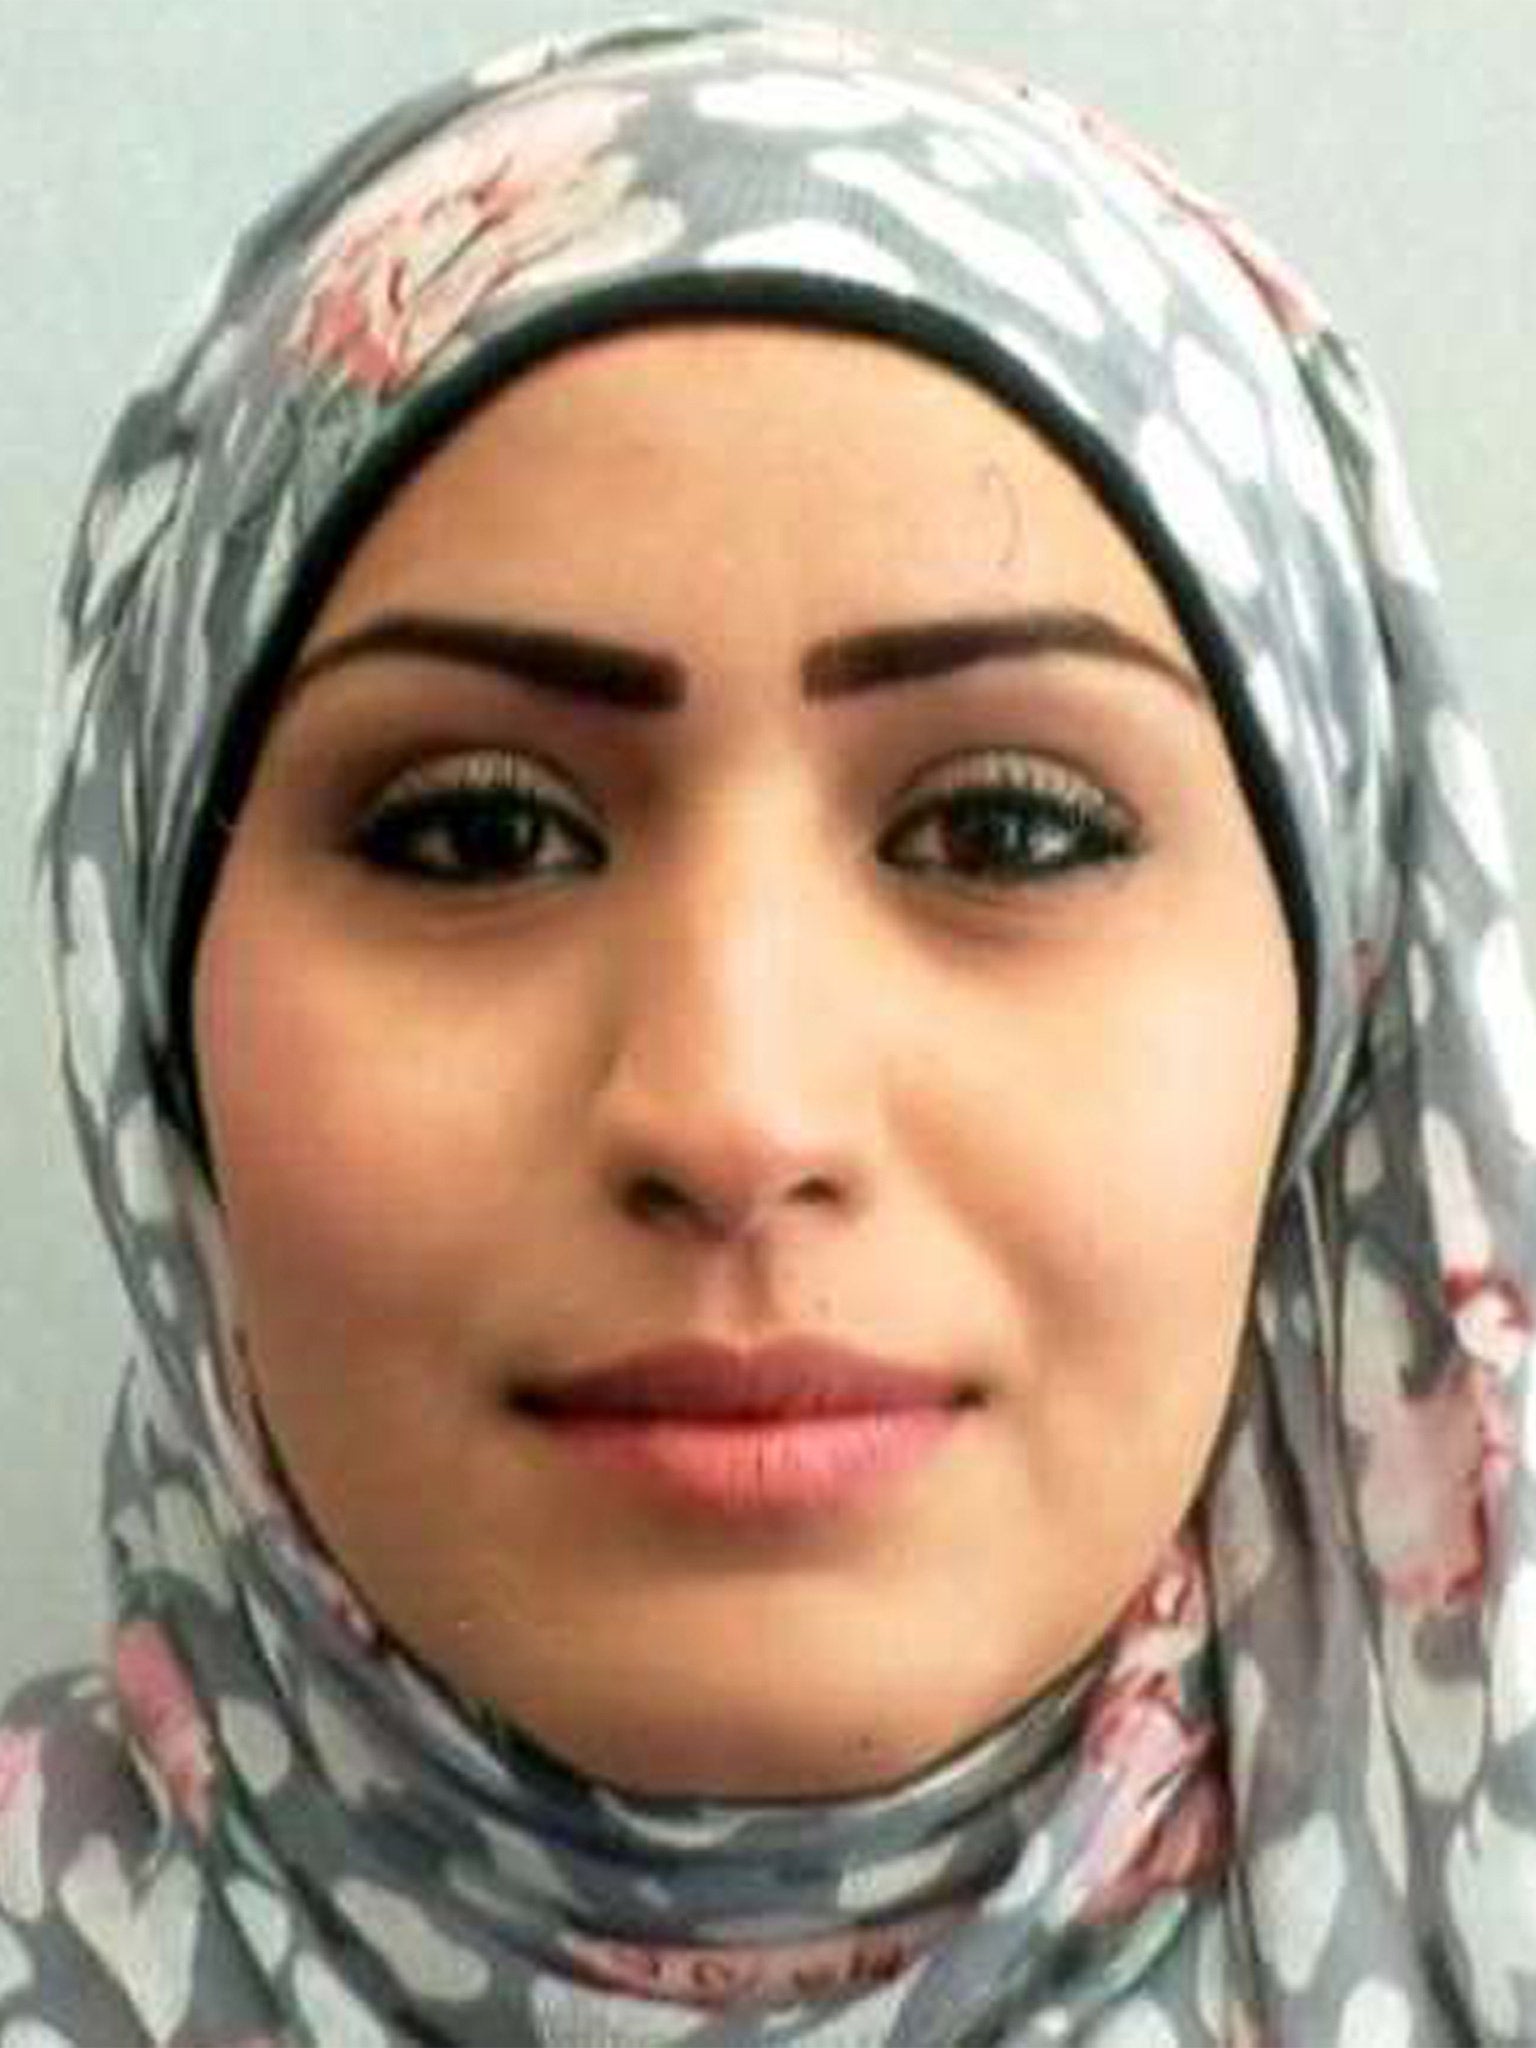 Rania Alayed was murdered by her husband in 2013